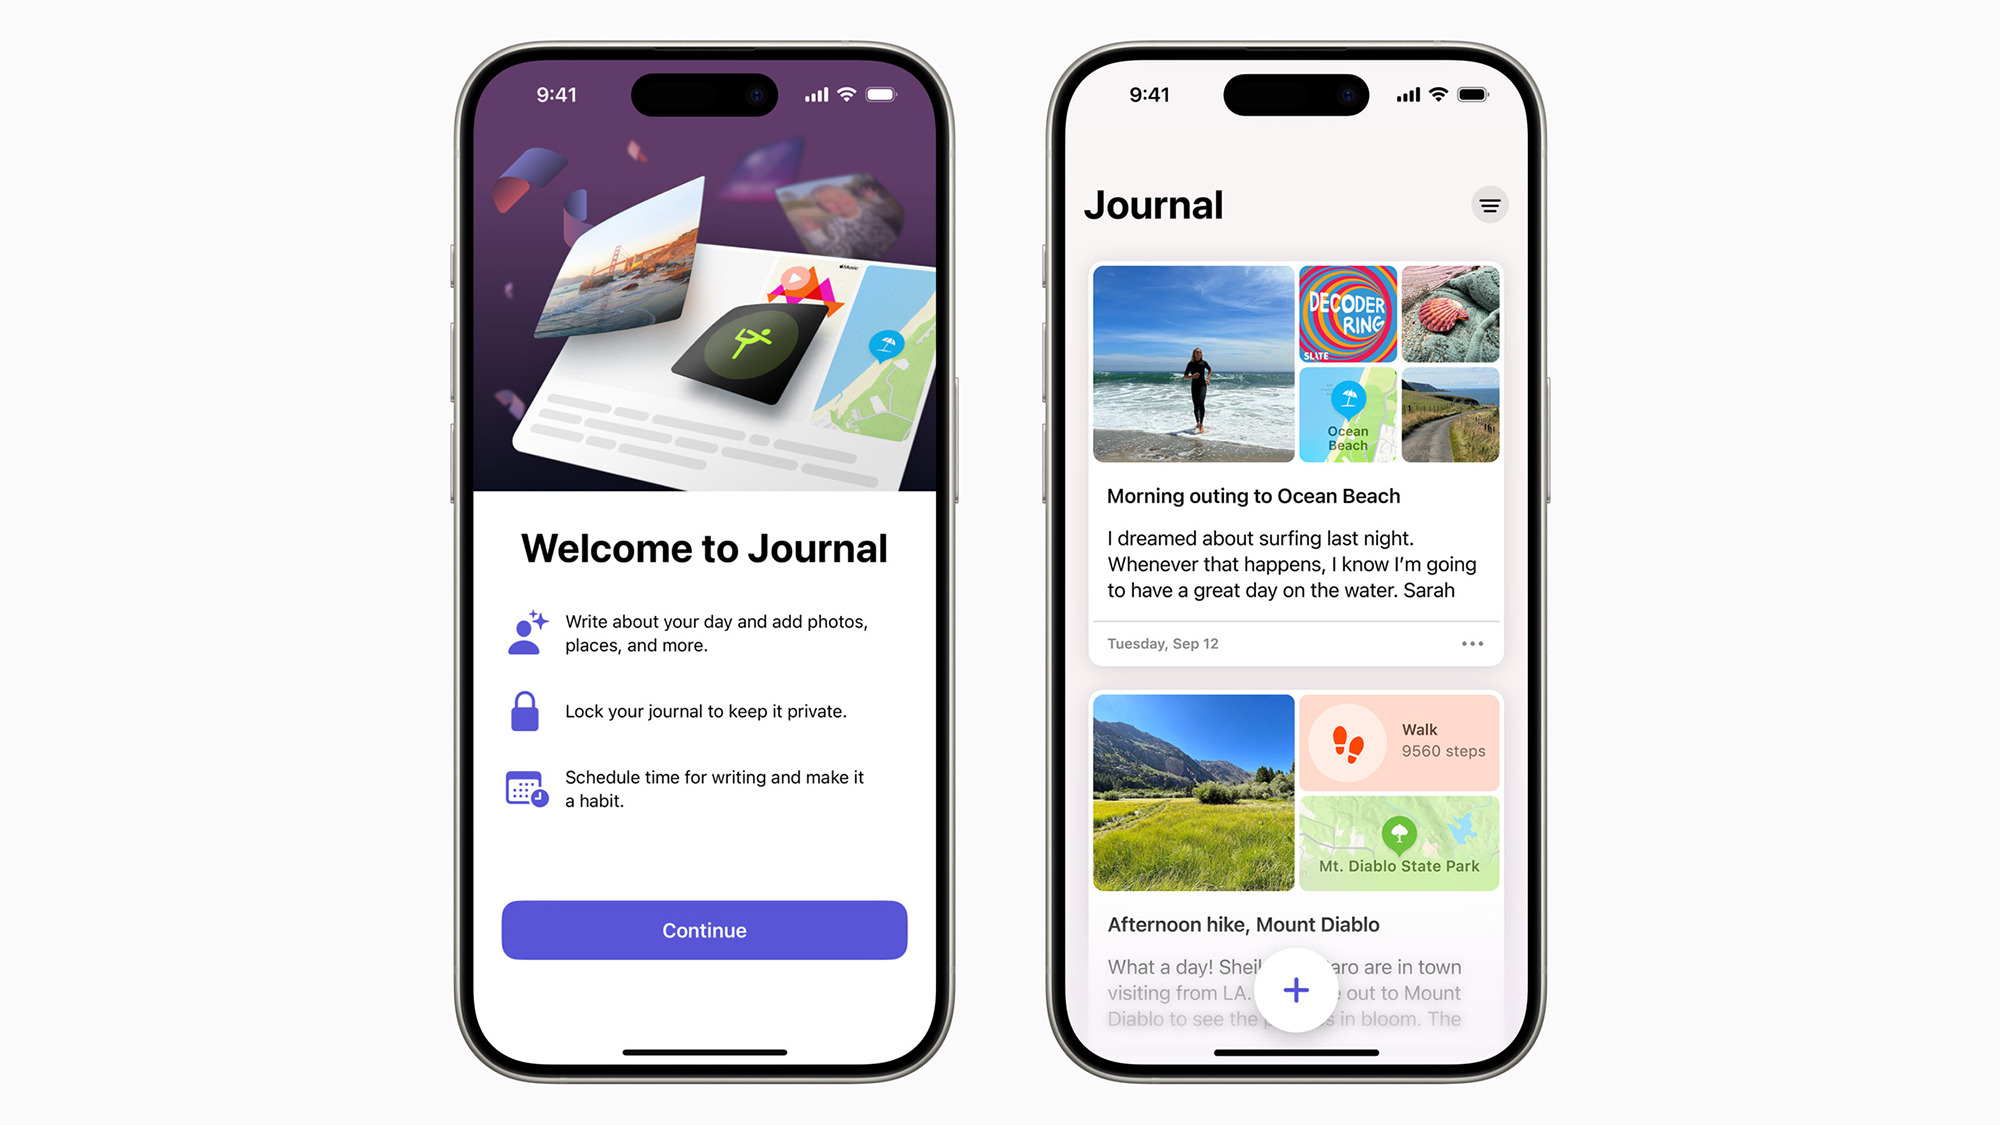 How to get started with Apple’s new Journal app